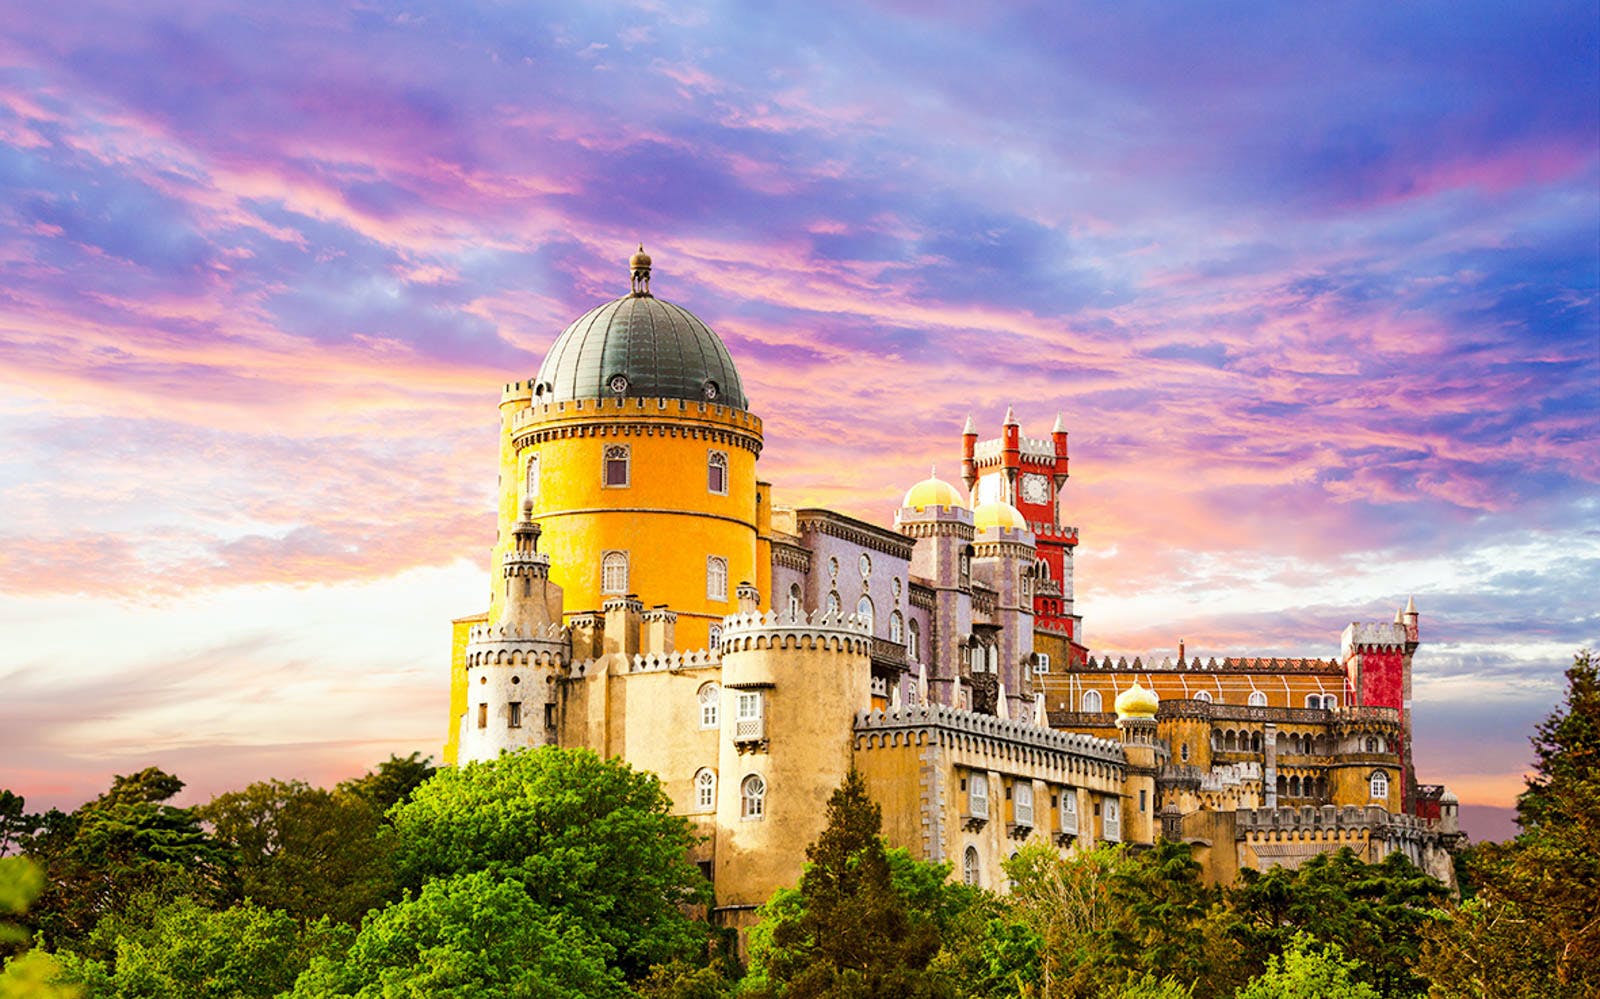 Can You *Actually* Score at Least 83% On This All-Rounded Knowledge Quiz? National Palace of Pena, Sintra, Portugal